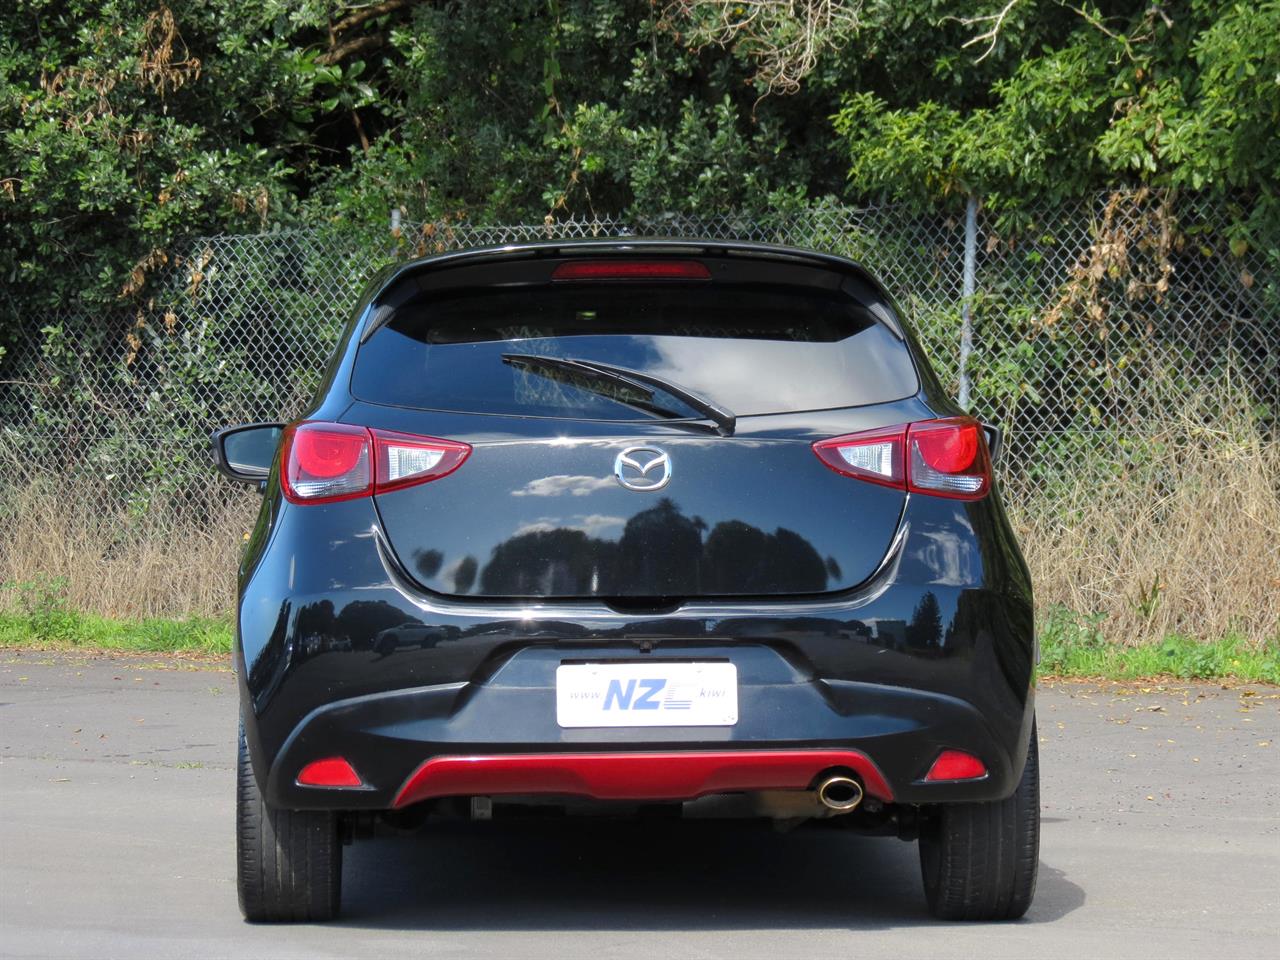 2015 Mazda Demio only $38 weekly